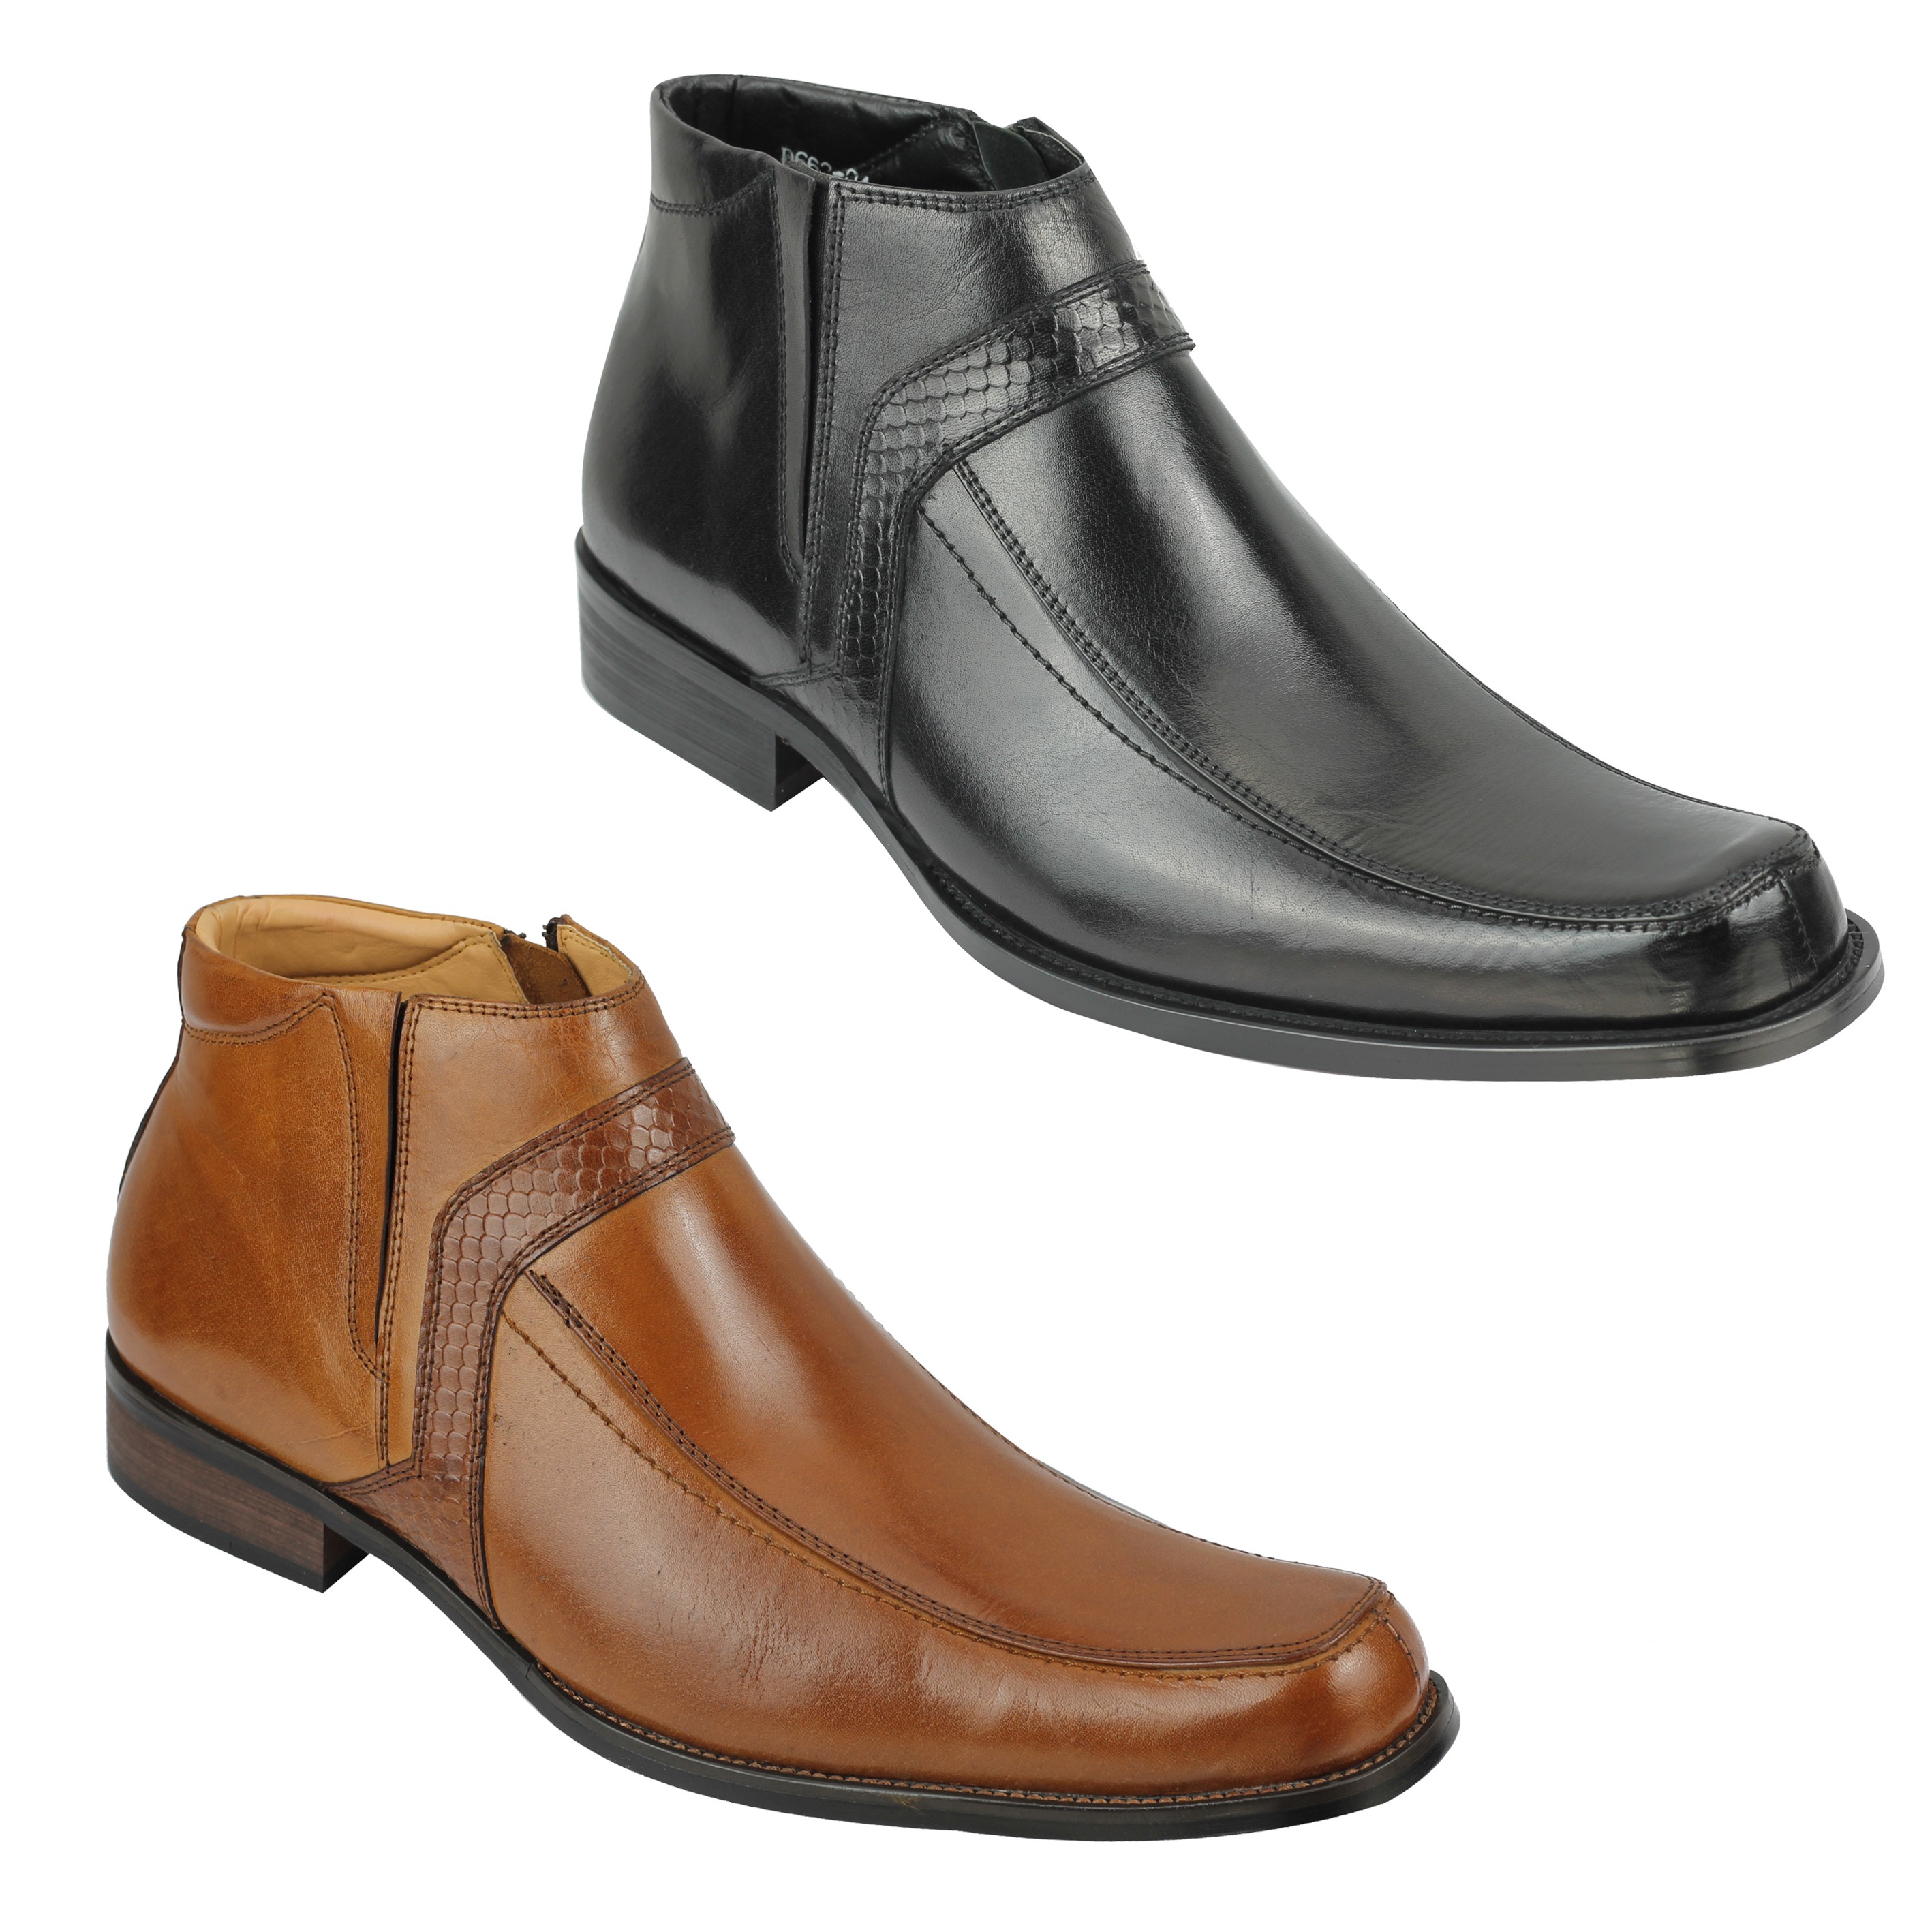 mens ankle boots uk